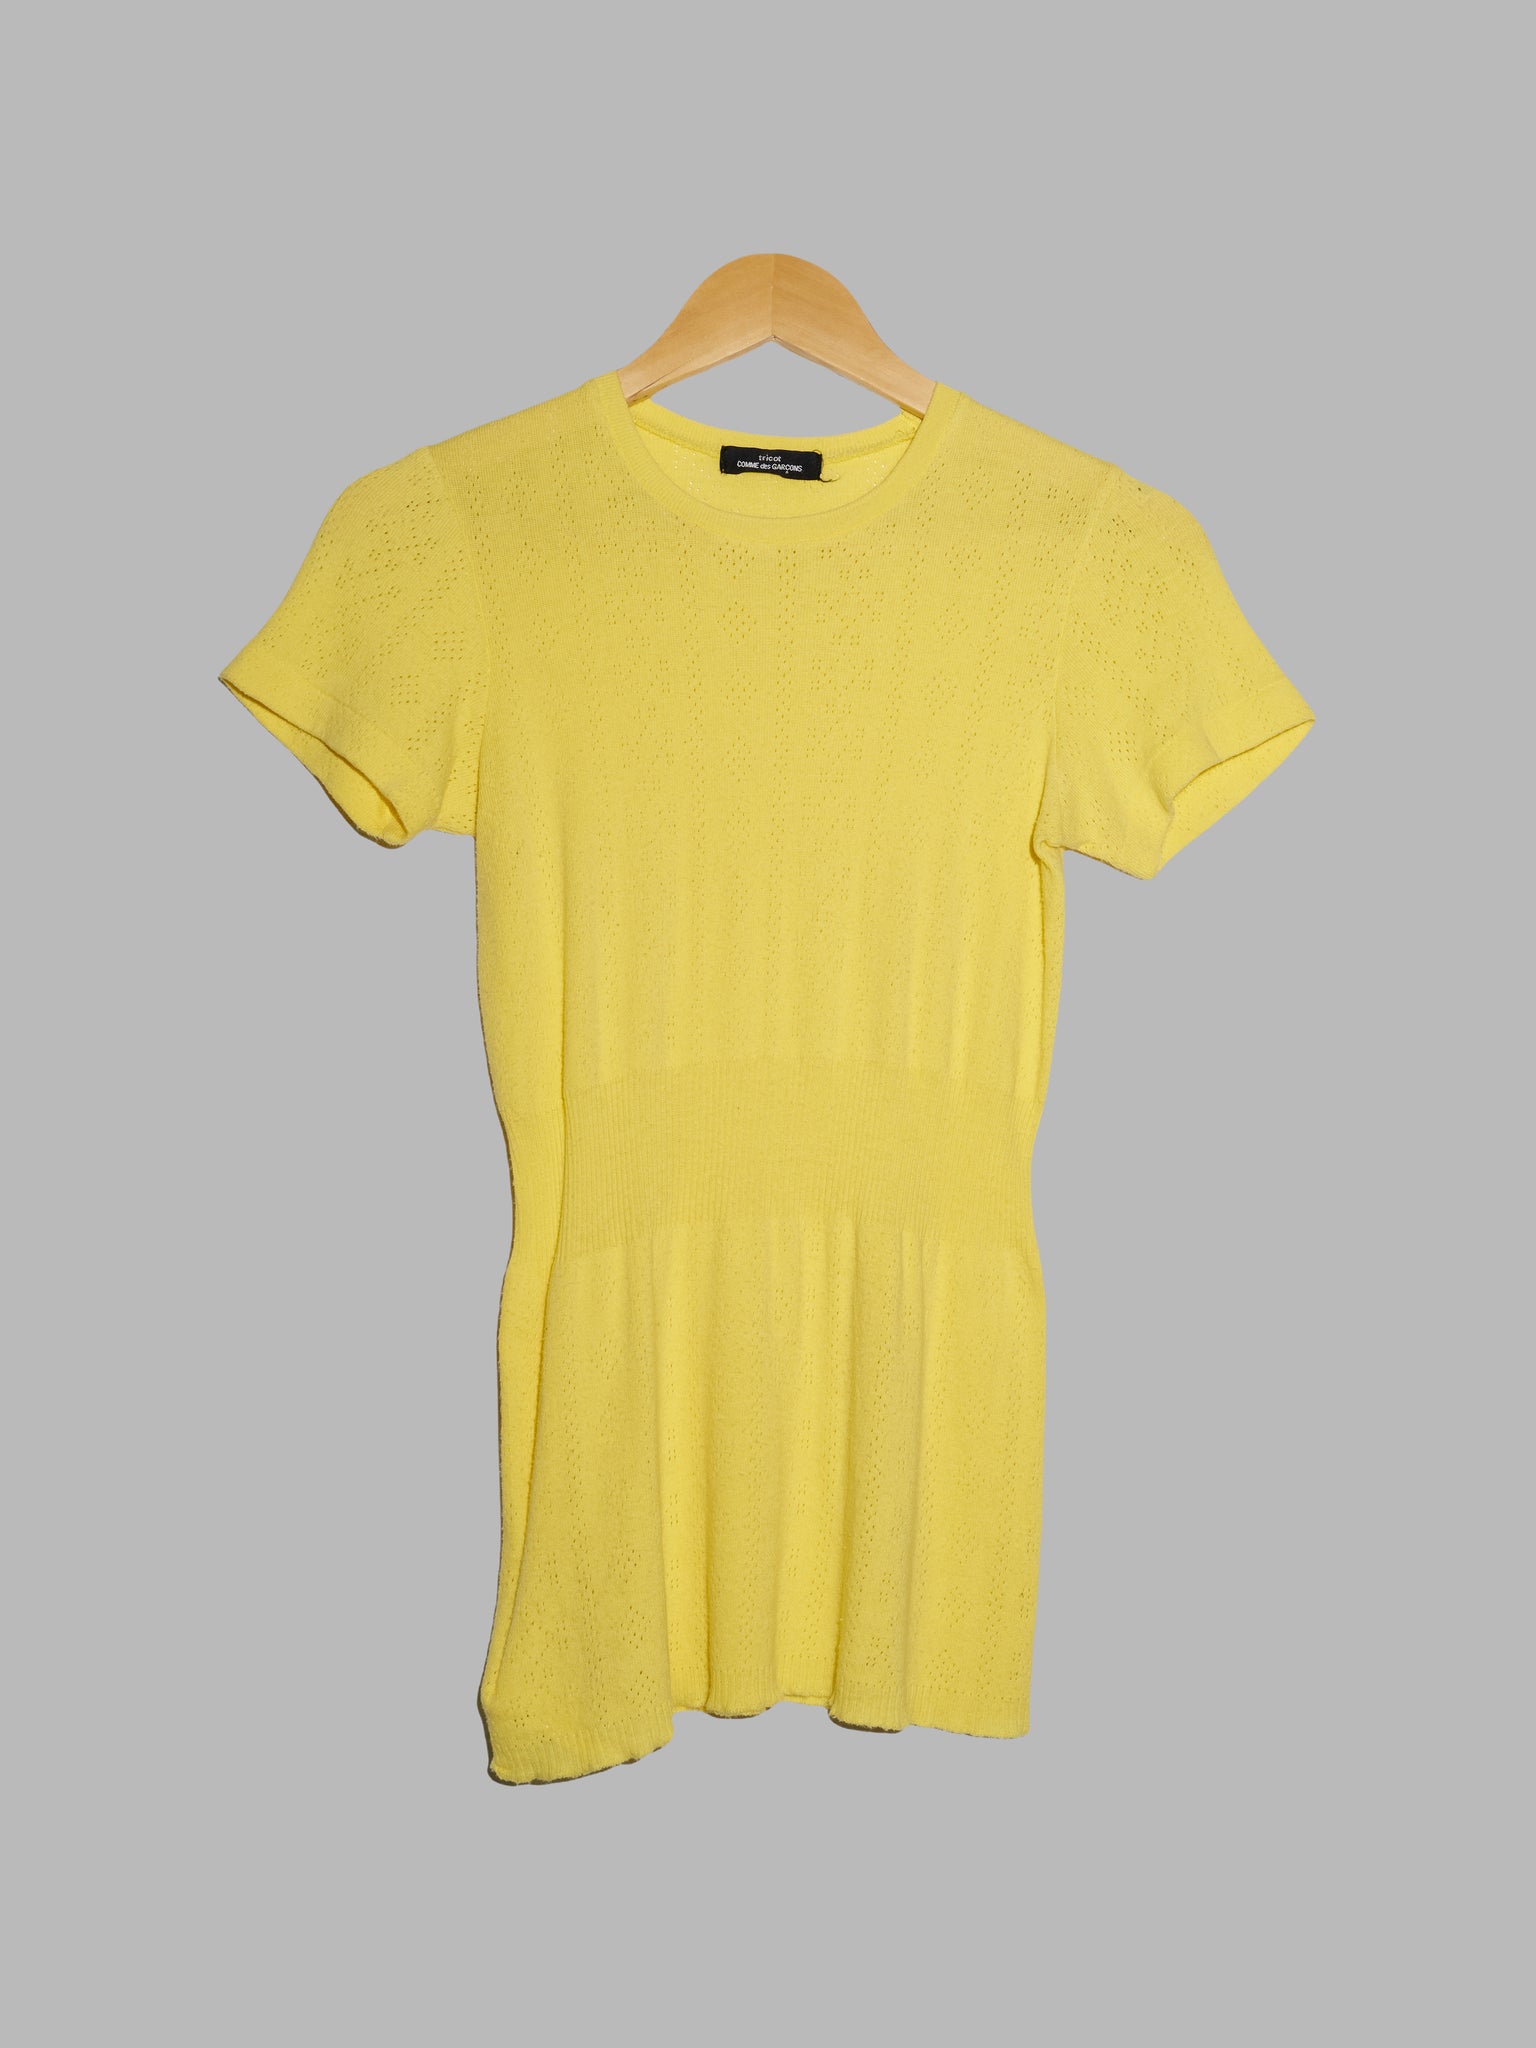 Tricot Comme des Garcons 2002 yellow cotton knit ribbed waist t-shirt